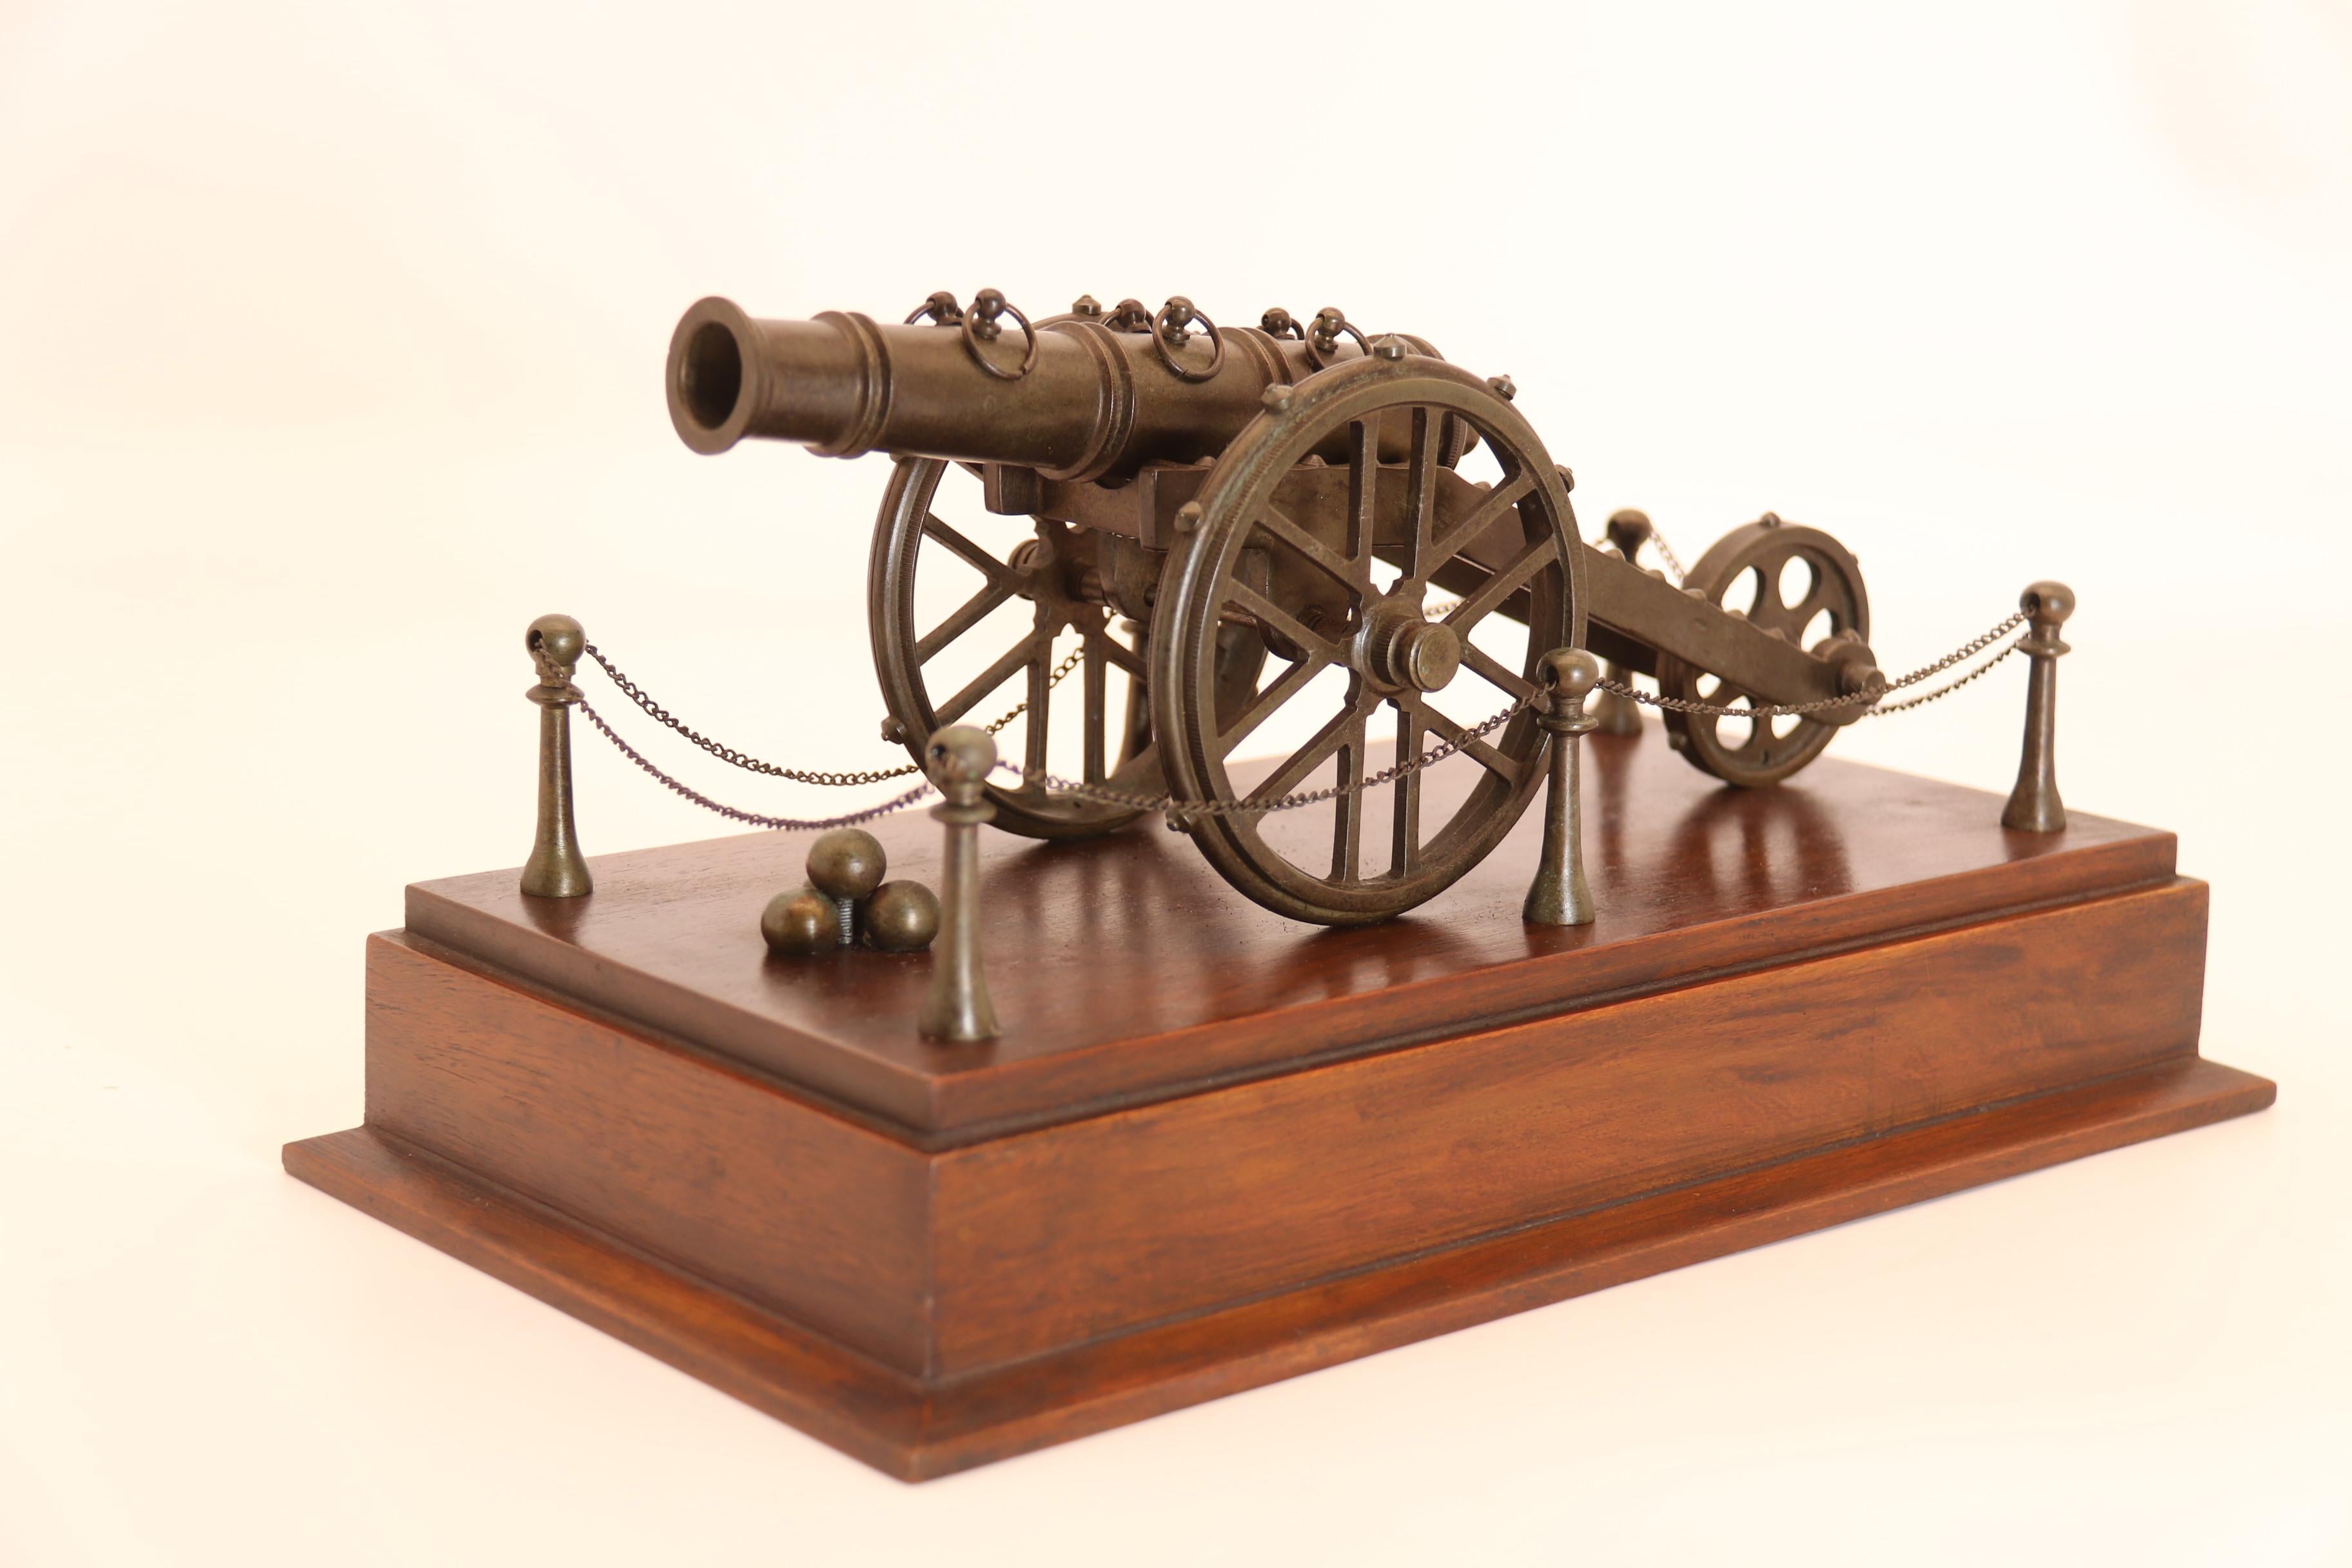 This superb finely detailed model of an 18th century cannon is very well engineered. It has large distinctive front spoked wheels with studded traction around the outer rim and a similar small rear version to aid movement. The plain robust carriage